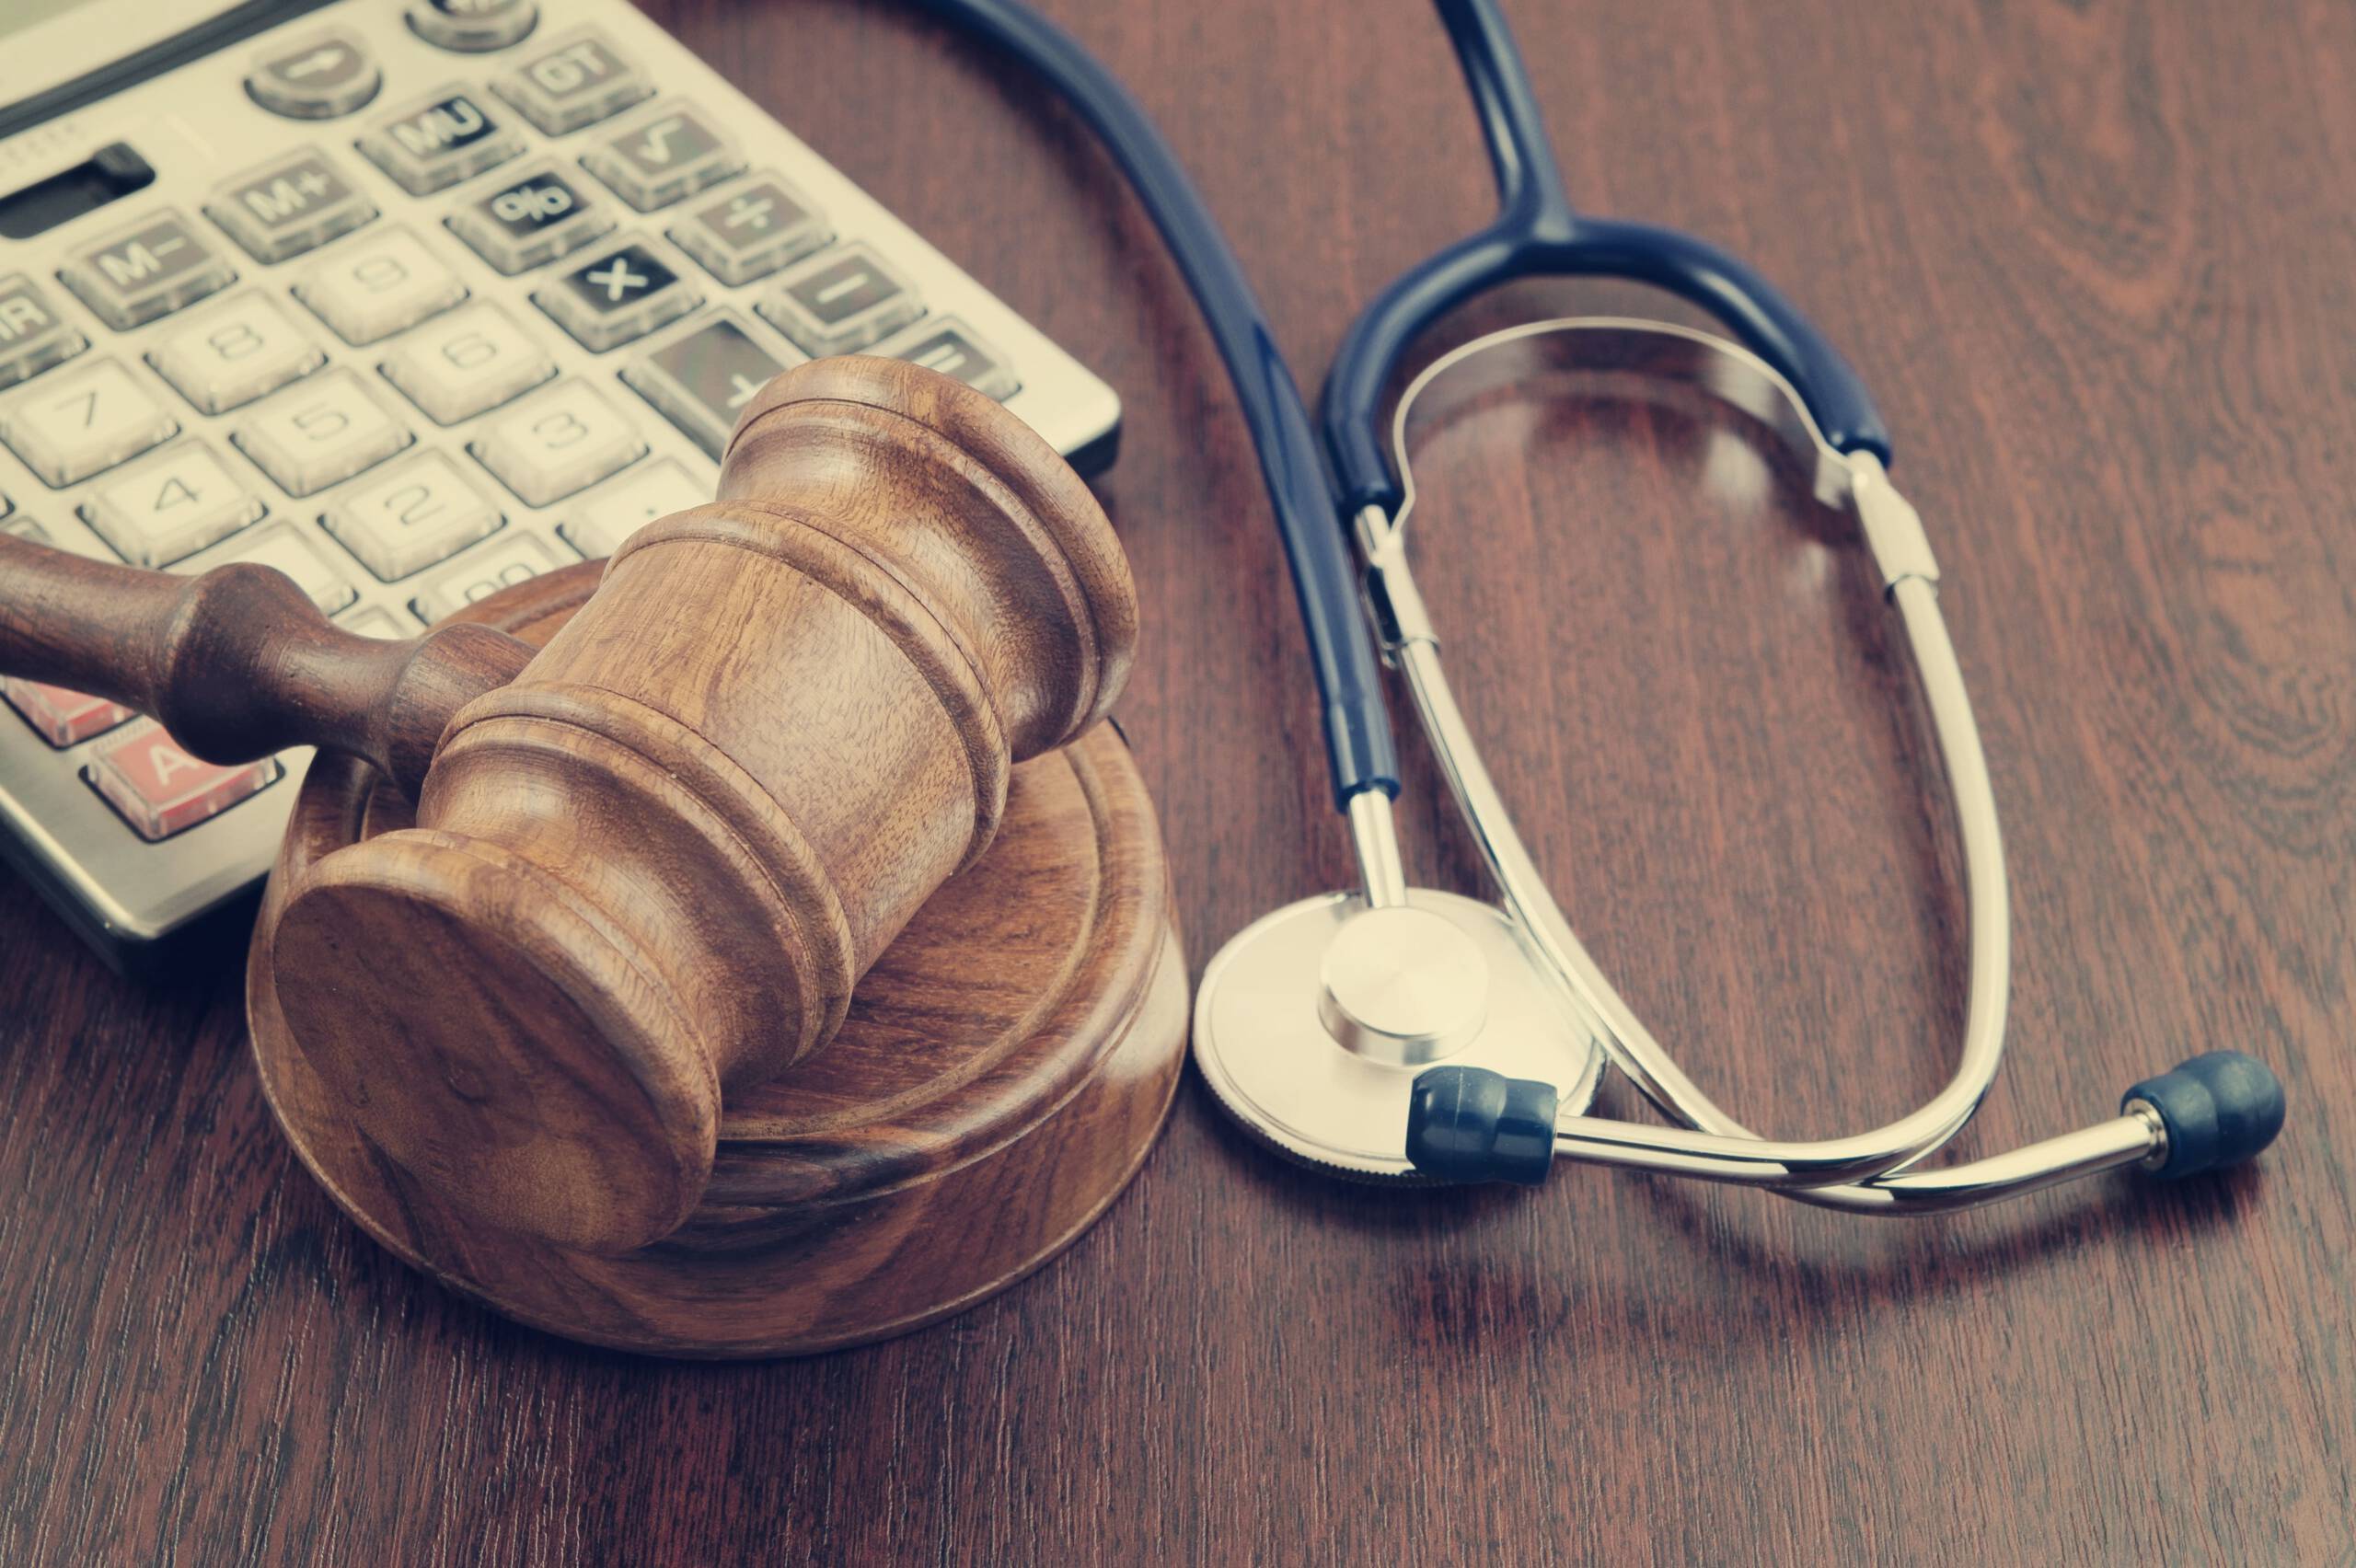 Who Should Pay for Your Medical Malpractice Insurance?